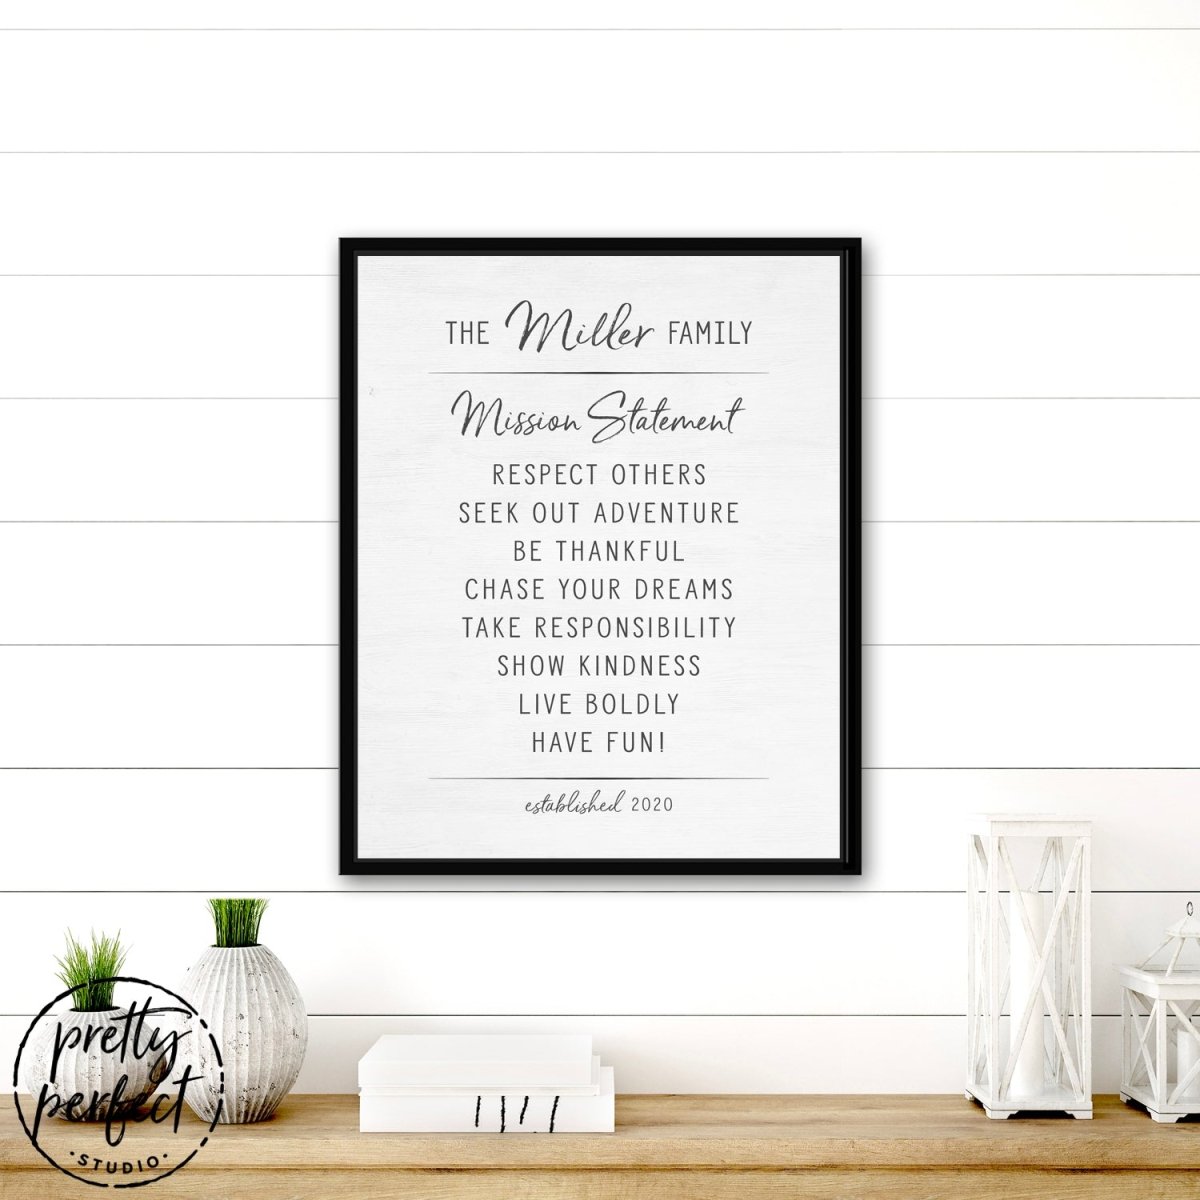 Family Mission Statement Sign freeshipping - Pretty Perfect Studio